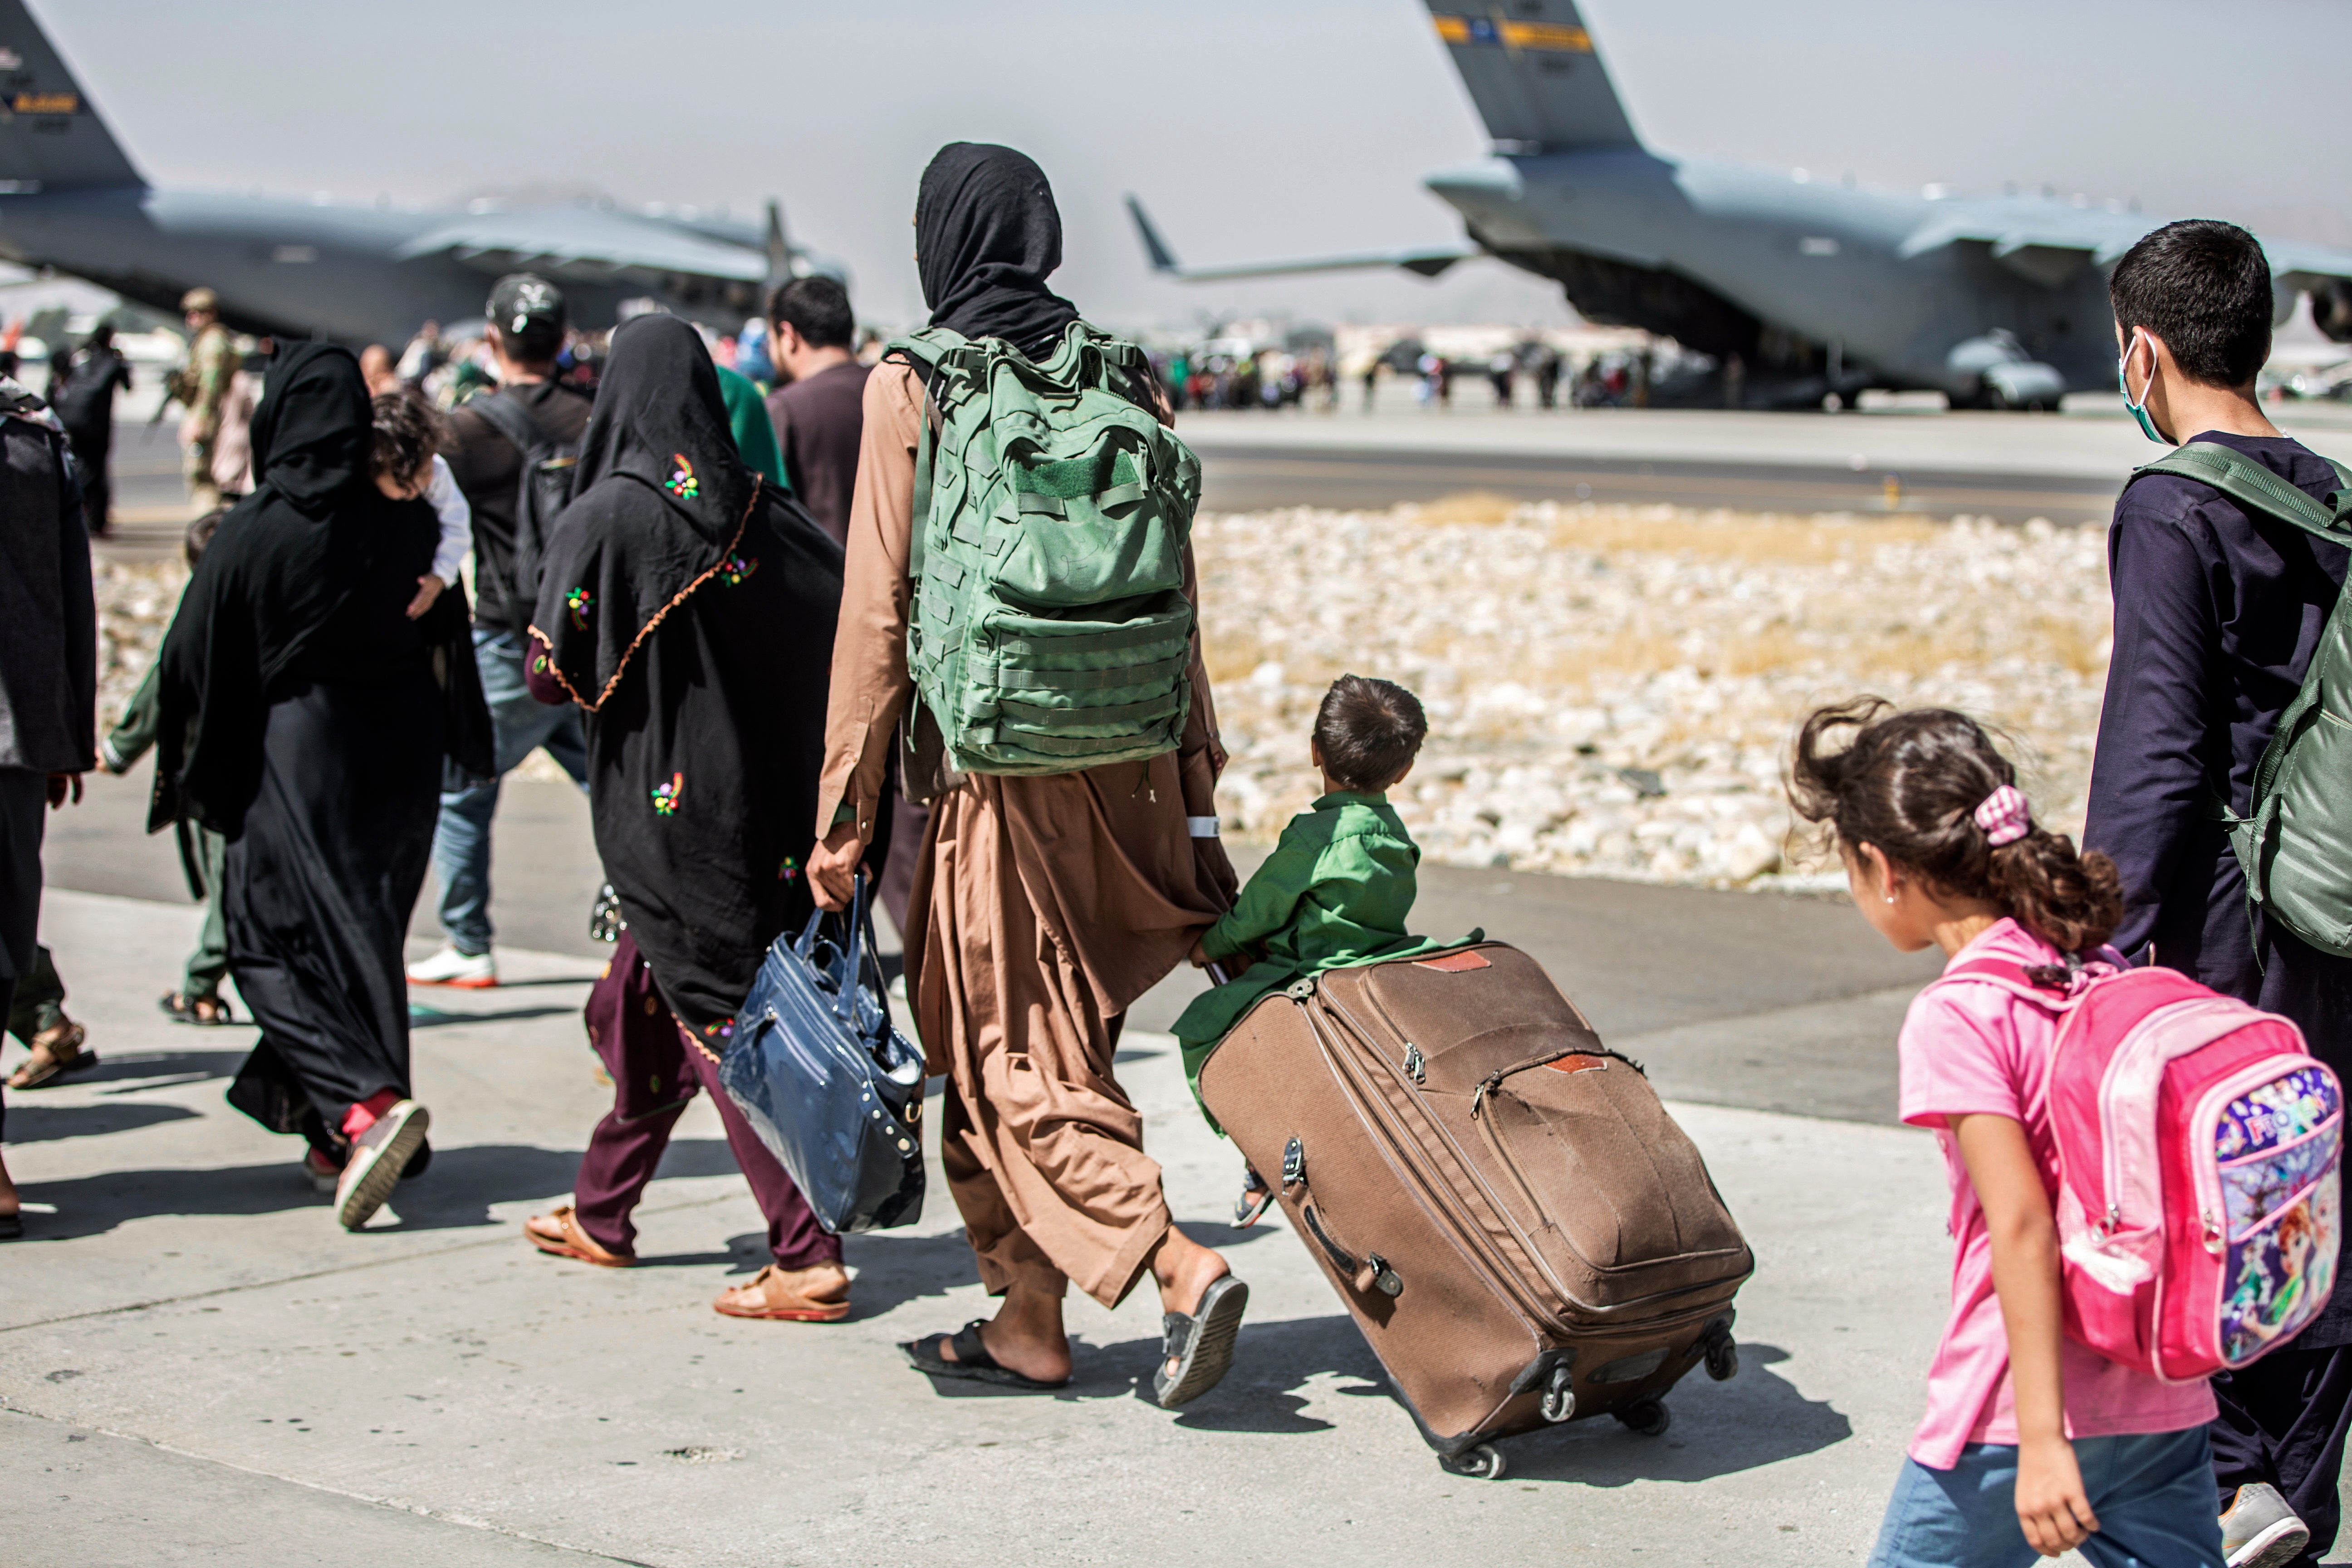 Families walk towards their flight during ongoing evacuations at Hamid Karzai International Airport, in Kabul, Afghanistan